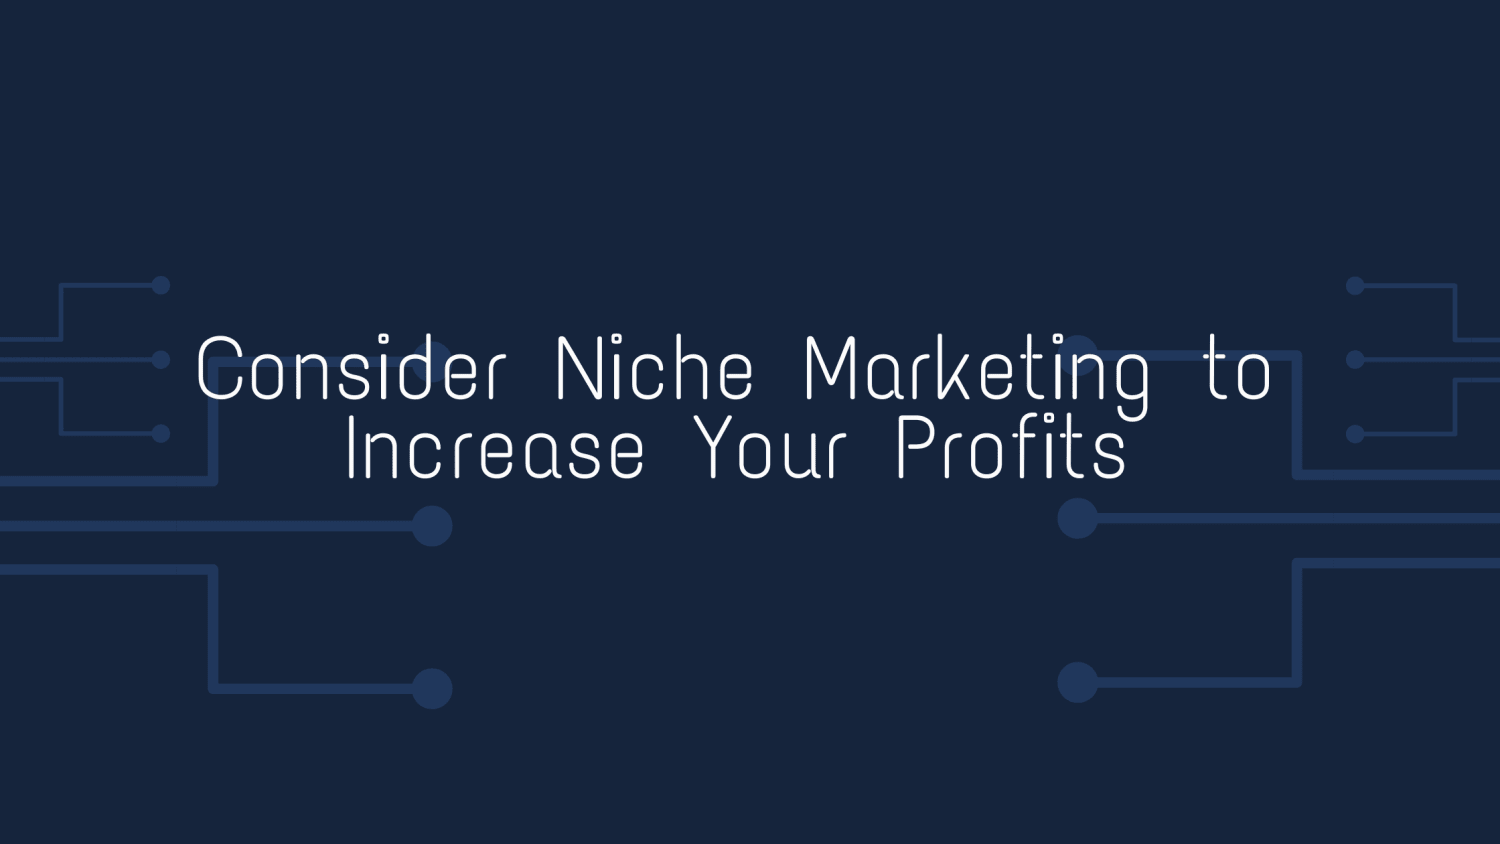 Consider Niche Marketing to Increase Your Profits